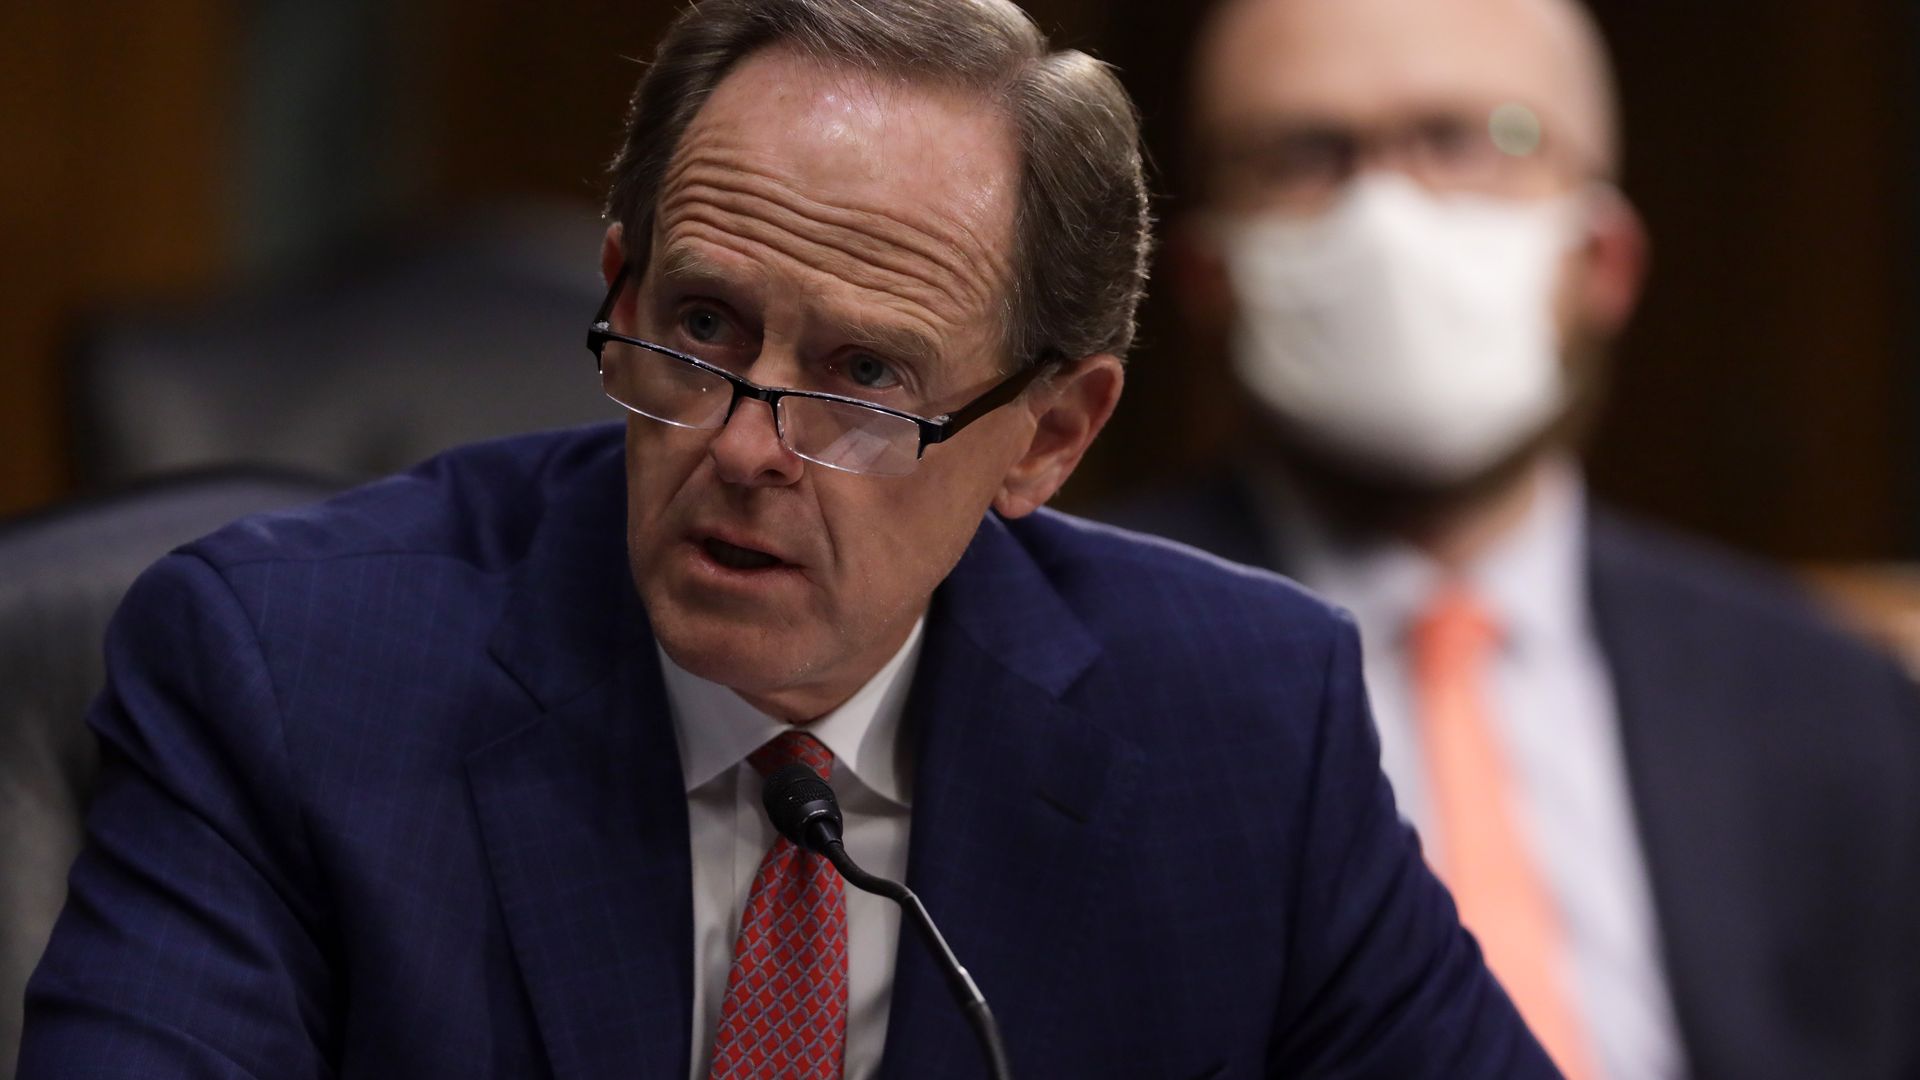 Sen. Pat Toomey (R-PA) speaks during a confirmation hearing before Senate Committee hearing